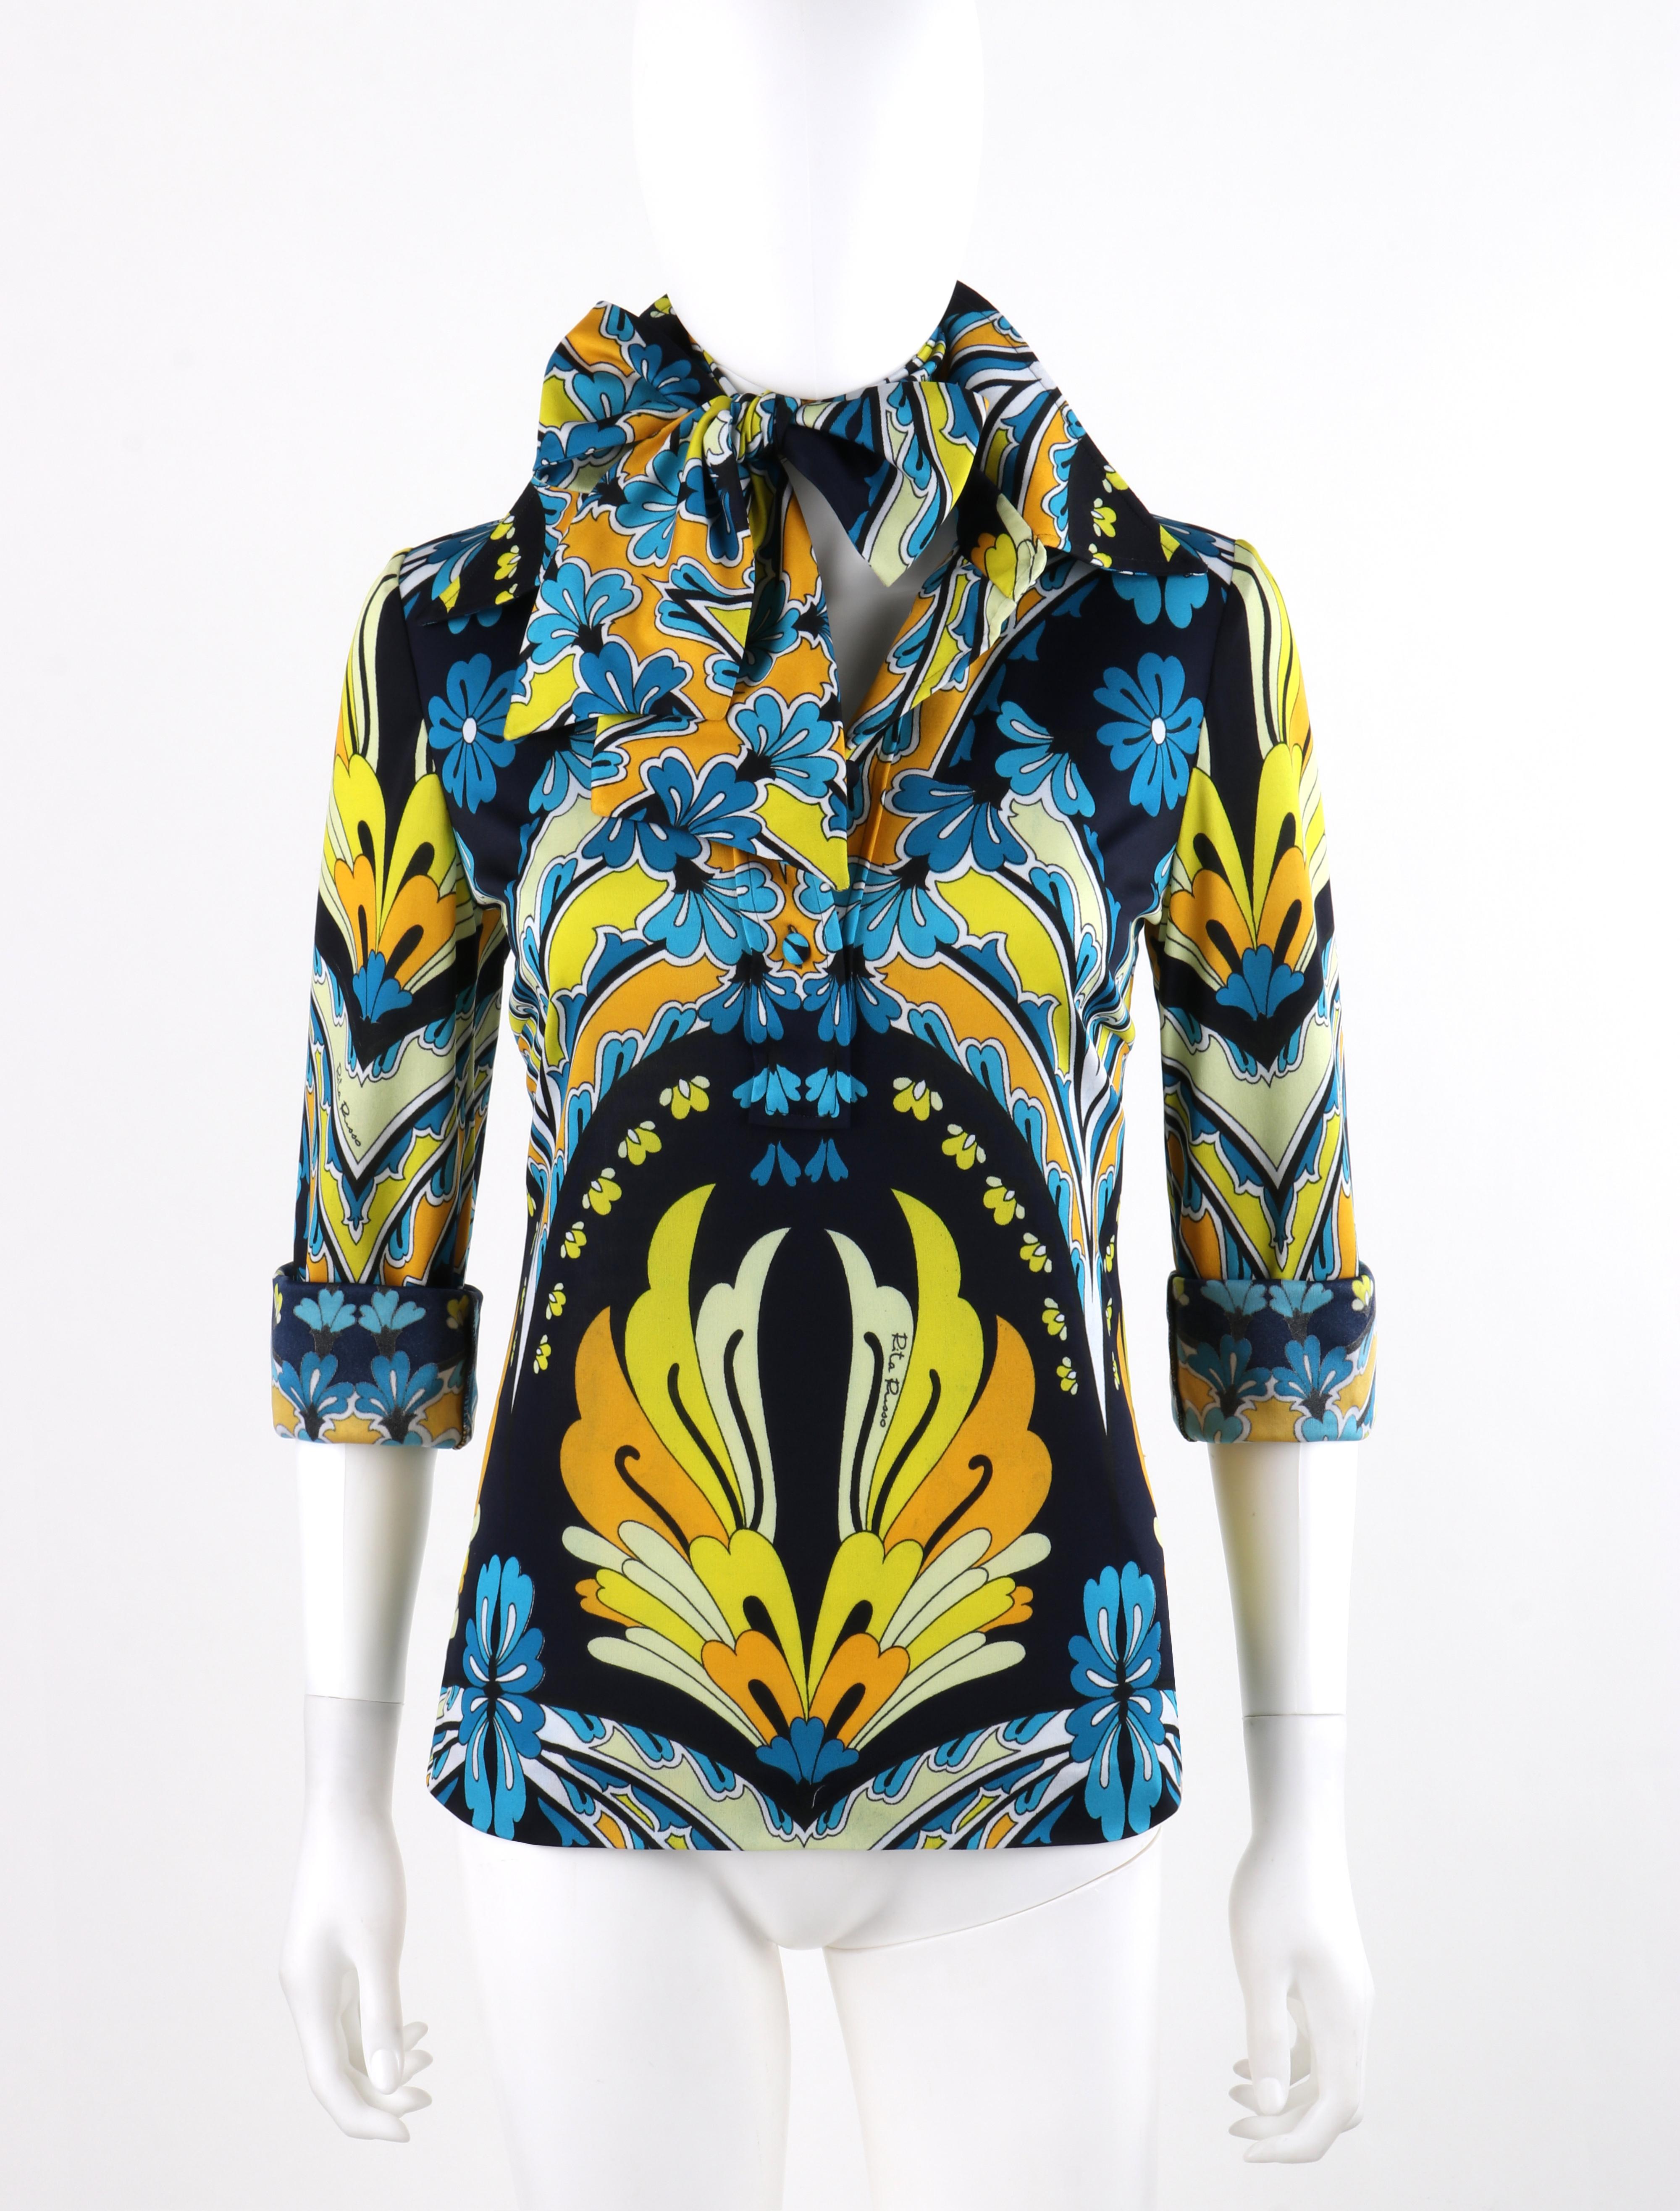 RITA RUSSO c.1970s Blue Yellow Abstract Floral Half Button-Front Blouse Neck + Sash
 
Brand / Manufacturer: Rita Russo
Circa: 1970's
Style: Blouse, Sash (that could work as a belt, hair tie or neck bow)
Color(s): Shades of yellow, orange, blue,